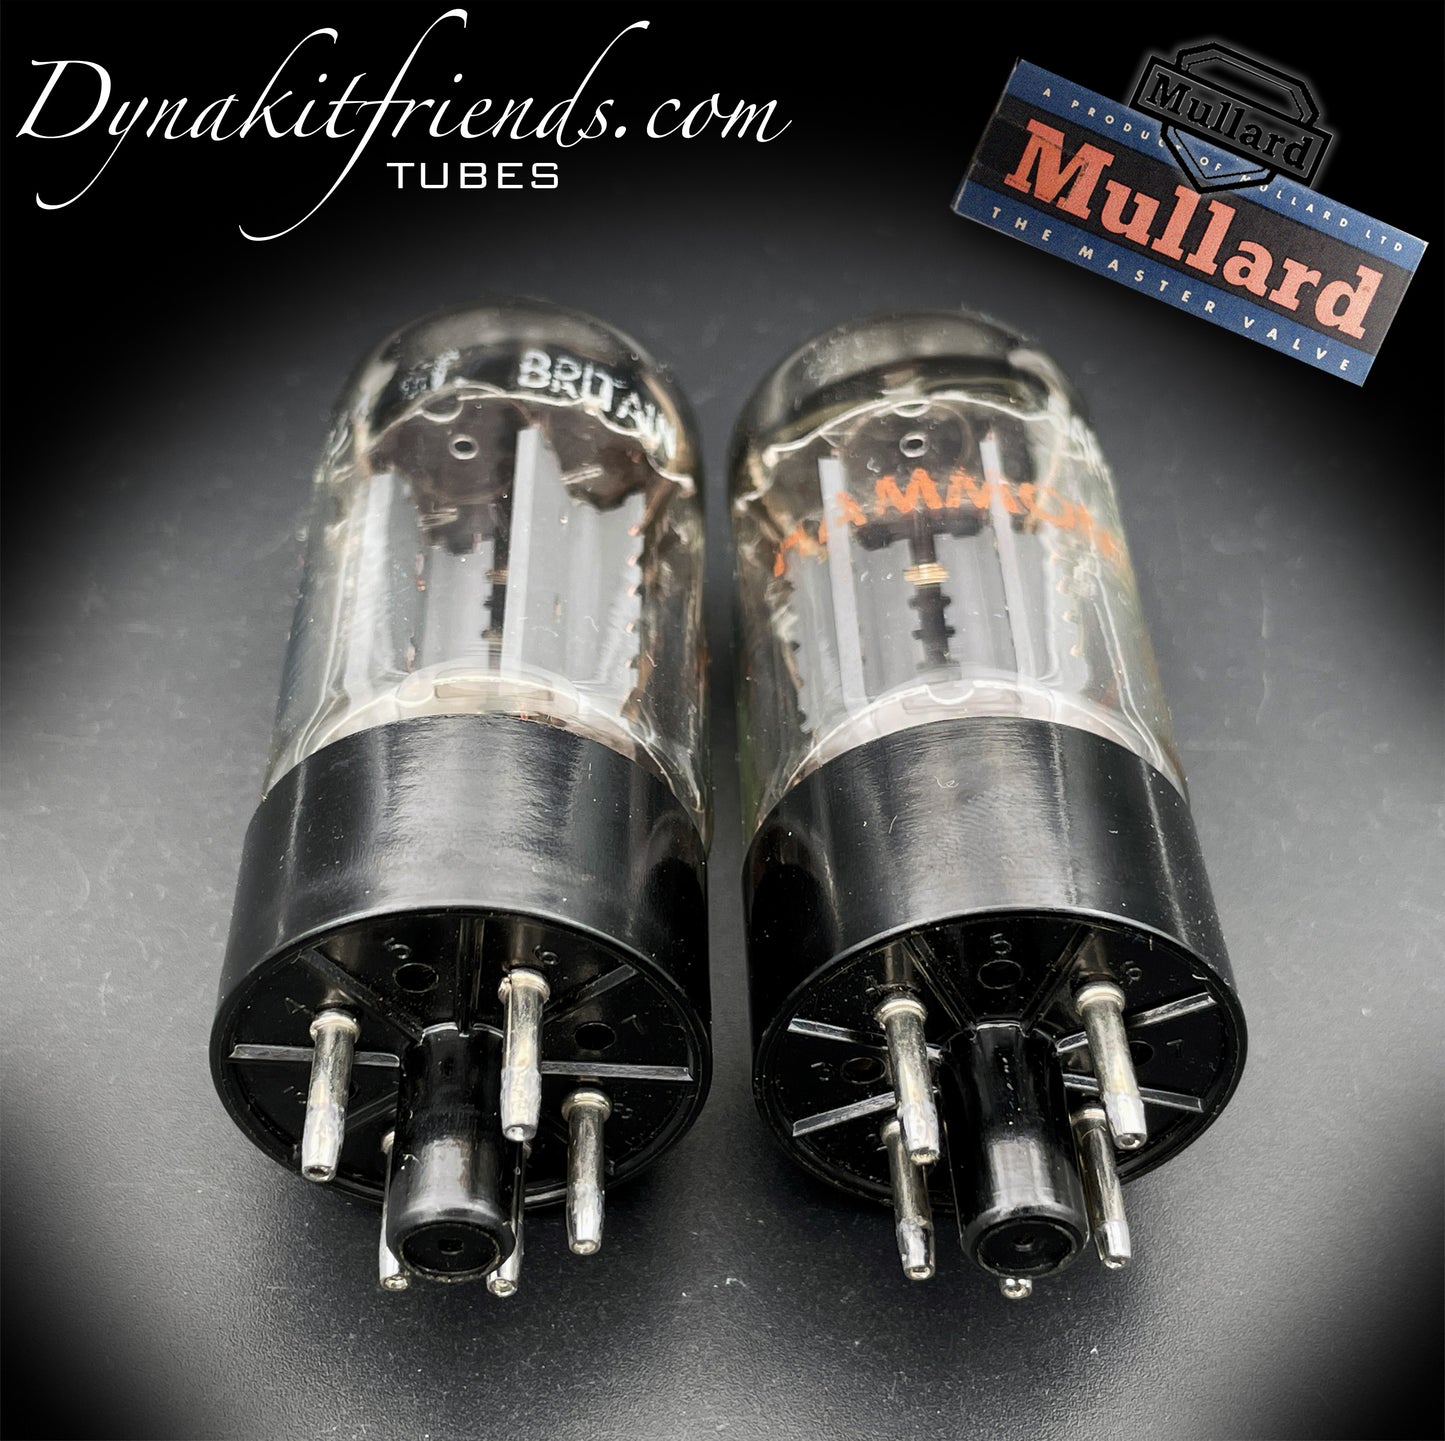 5AR4 ( GZ34 ) NOS MULLARD Blackburn 7 Notch Copper Plates Matched Pair Tubes Rectifiers Made in GT. BRITAIN